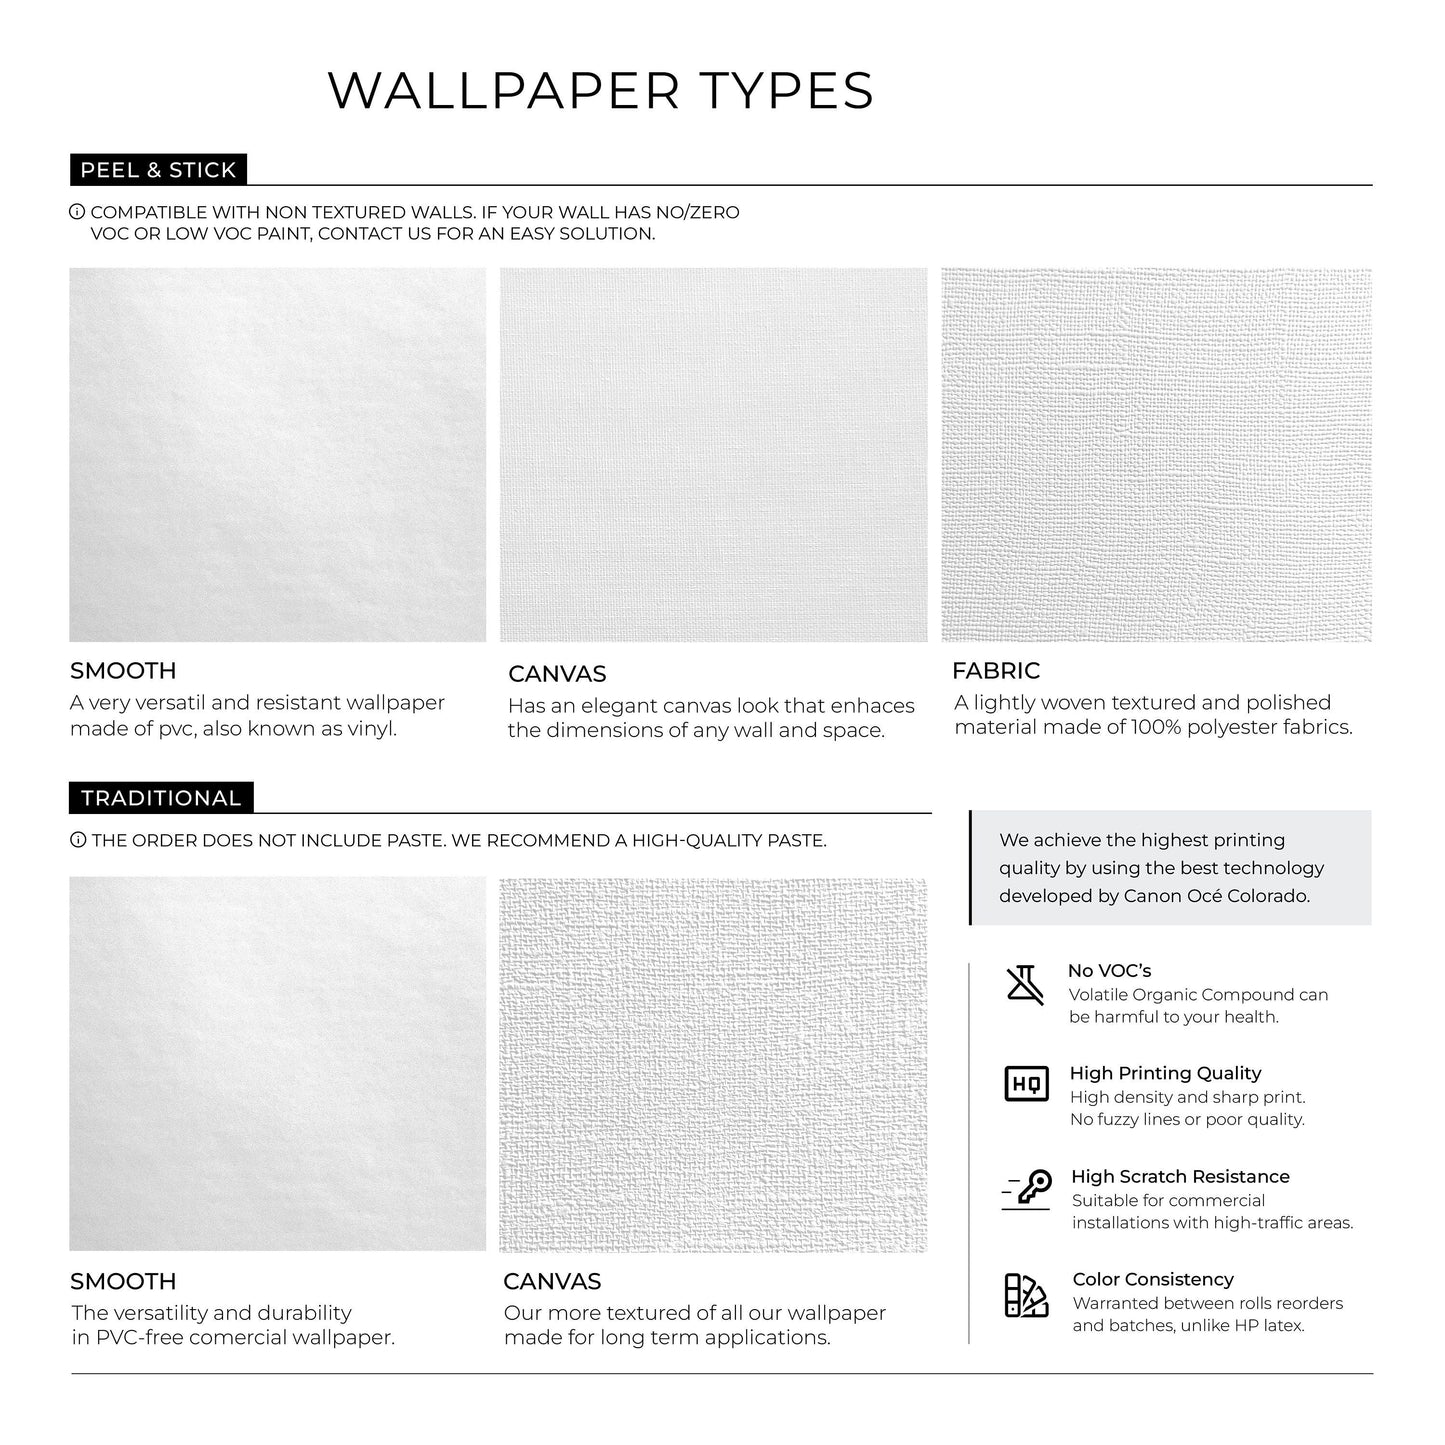 Removable Wallpaper, Boho Wall, Peel and Stick Wallpaper, Removable Wallpaper, Wall Paper Removable, Wallpaper - A626